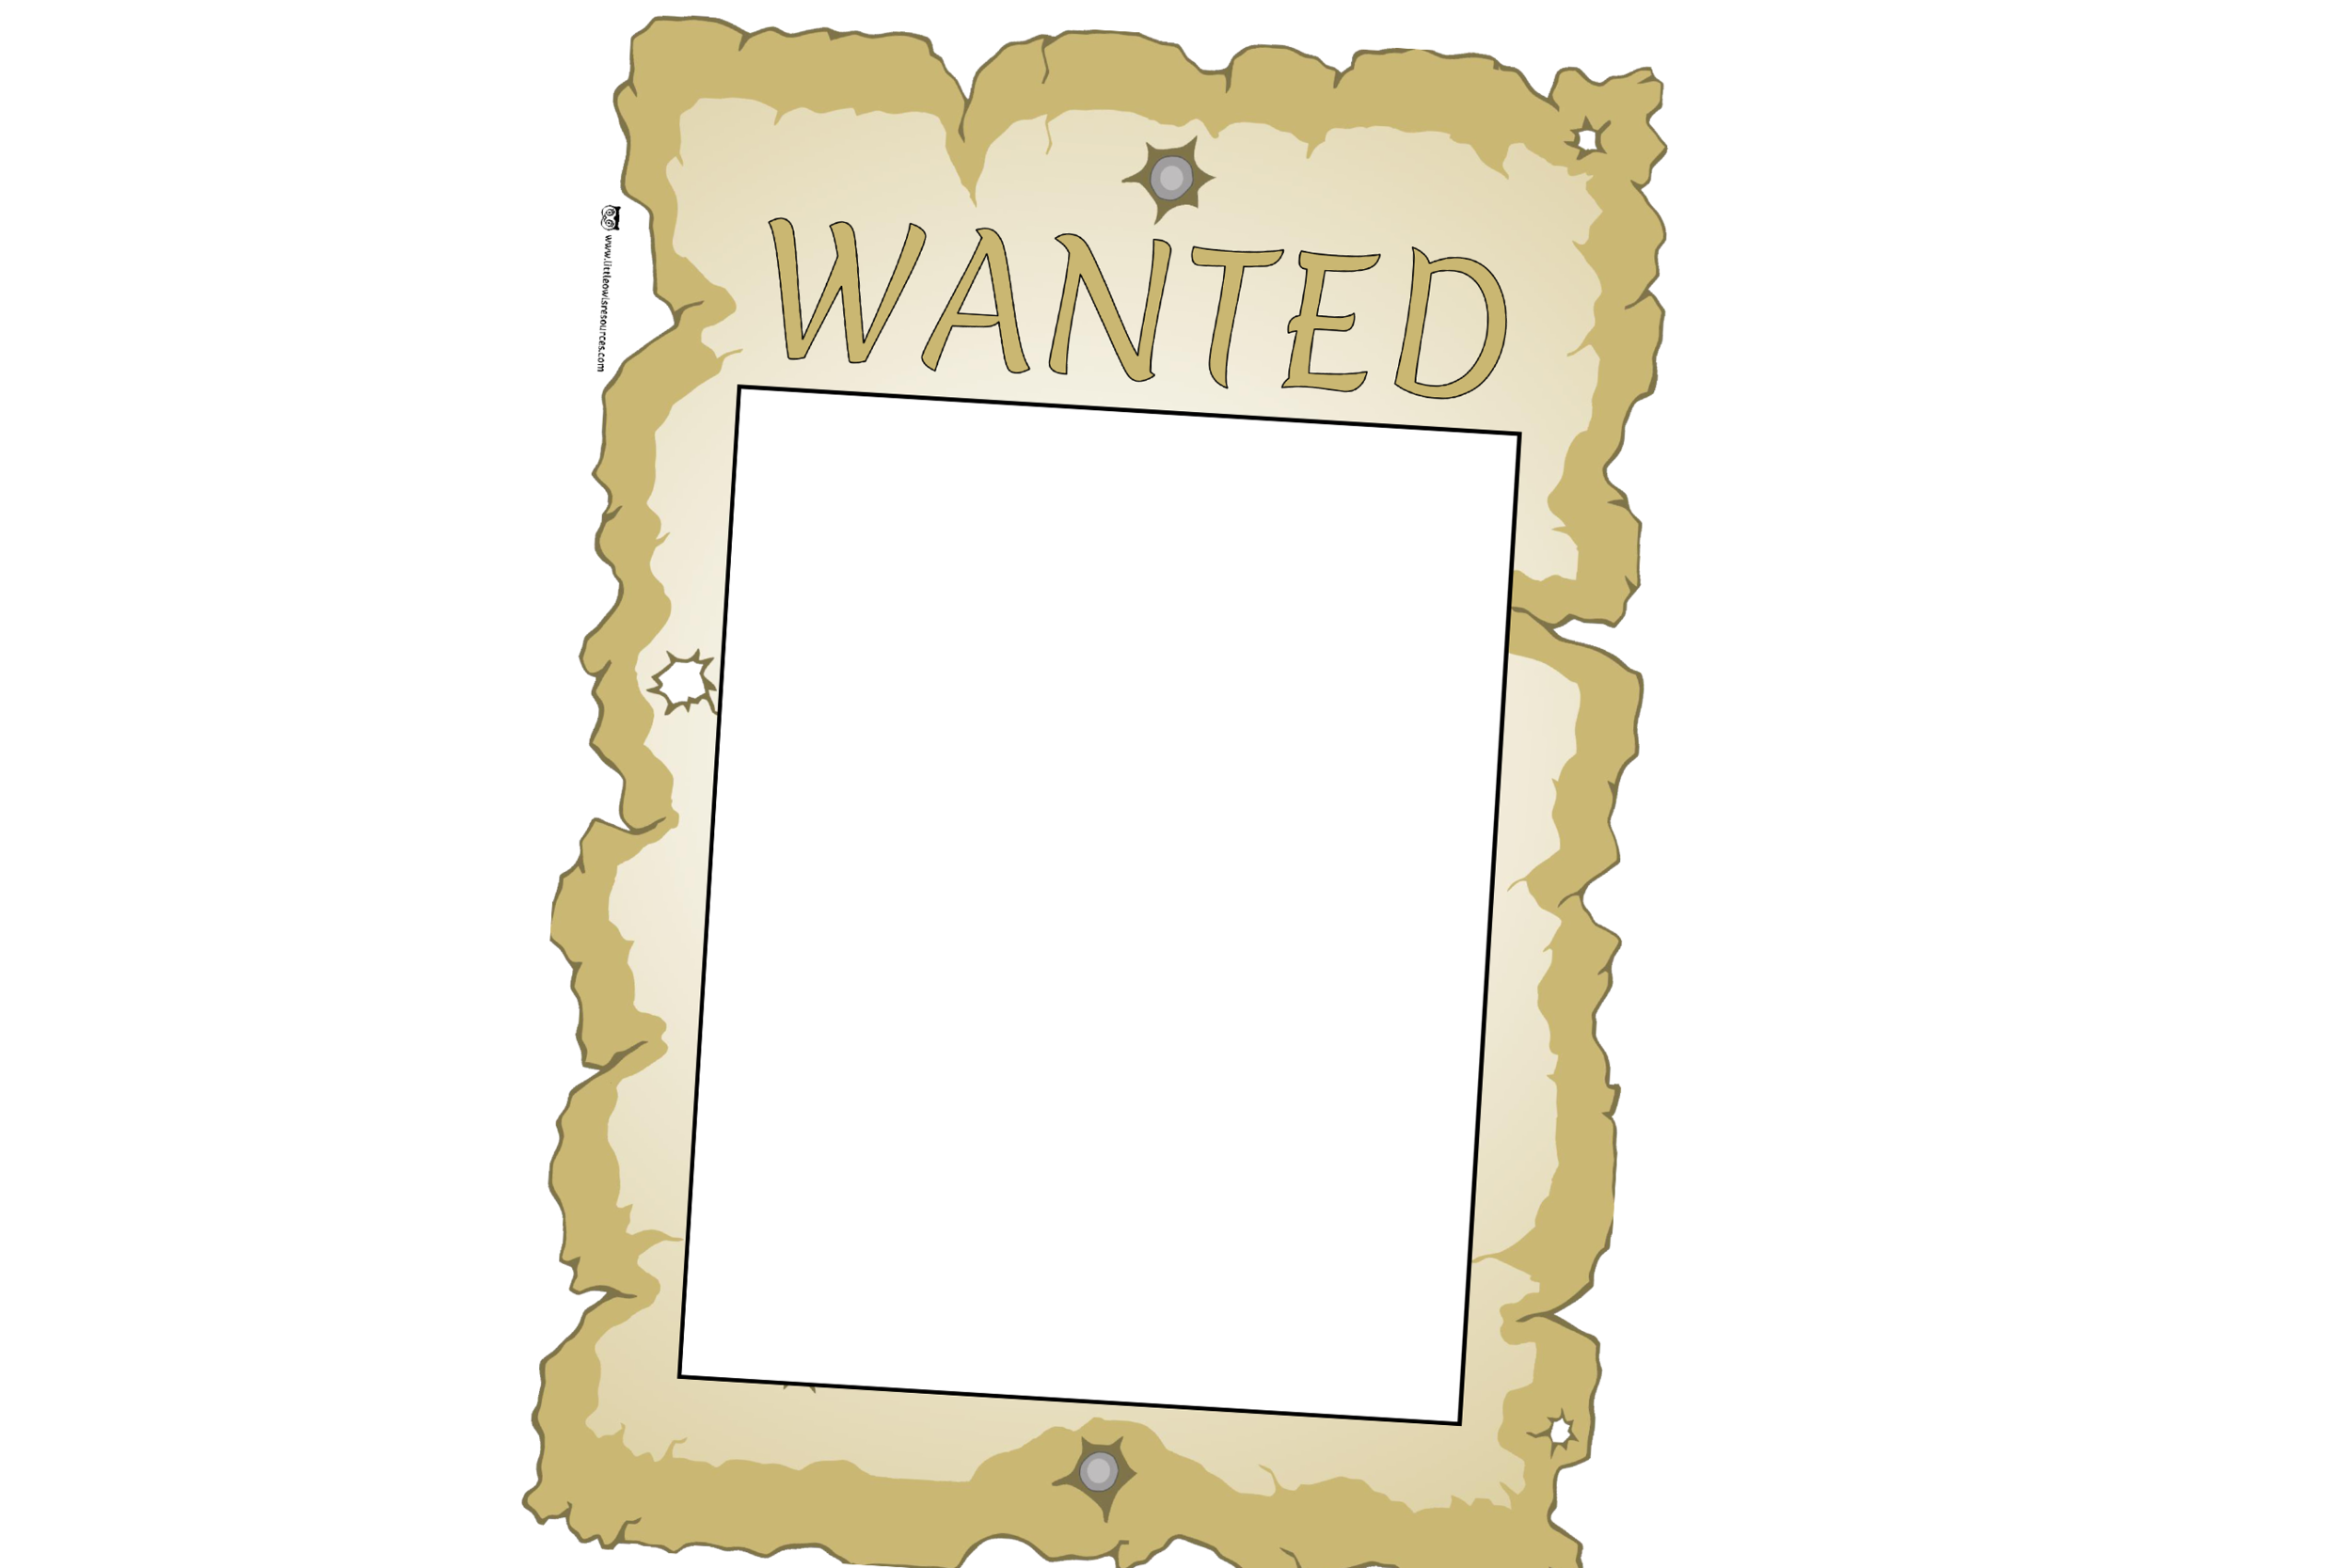 Writing frame. Рамка wanted. Wanted PNG на прозрачном. Рамка wanted PNG. Wanted poster.